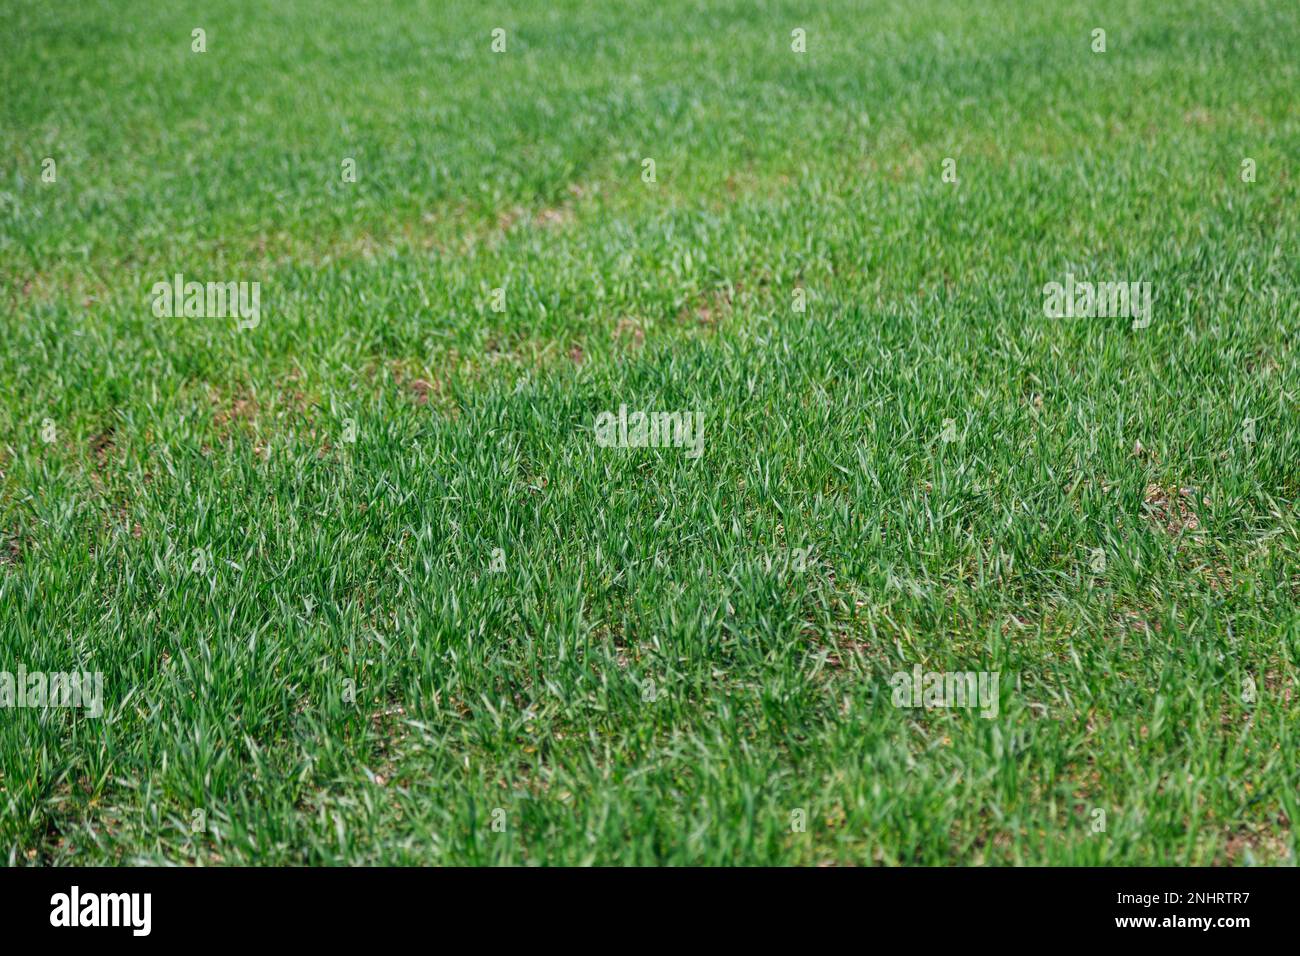 Open green field with sprouts planted in rows early spring. Spikelets of wheat or erysipelas. Agricultural plantations. Farming field. Herbal or grass Stock Photo